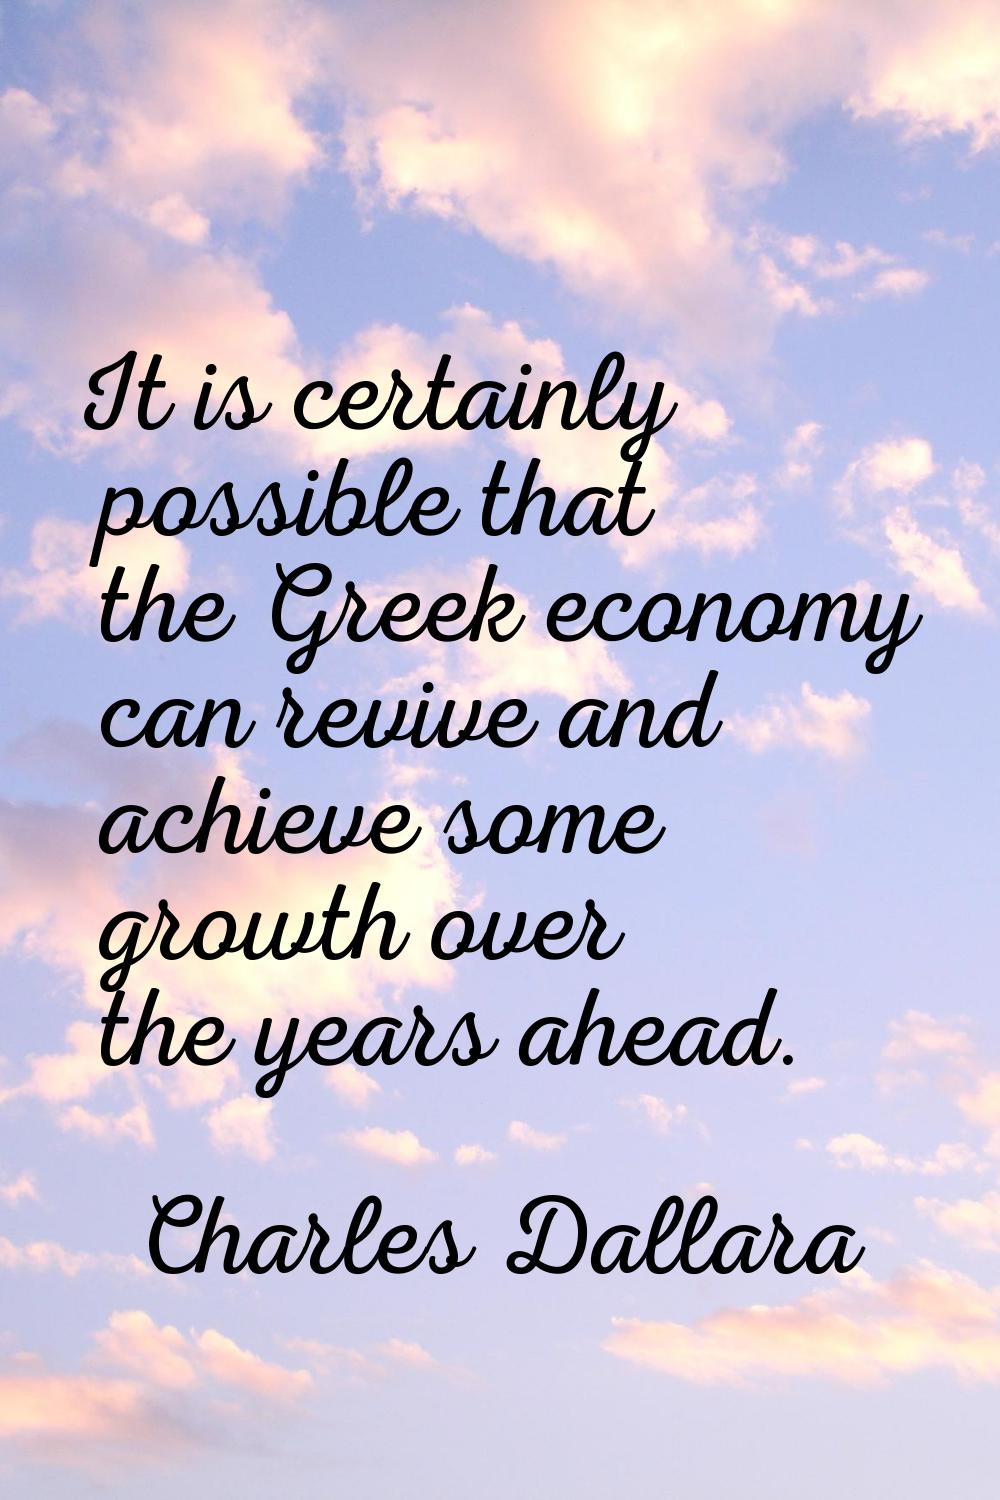 It is certainly possible that the Greek economy can revive and achieve some growth over the years a